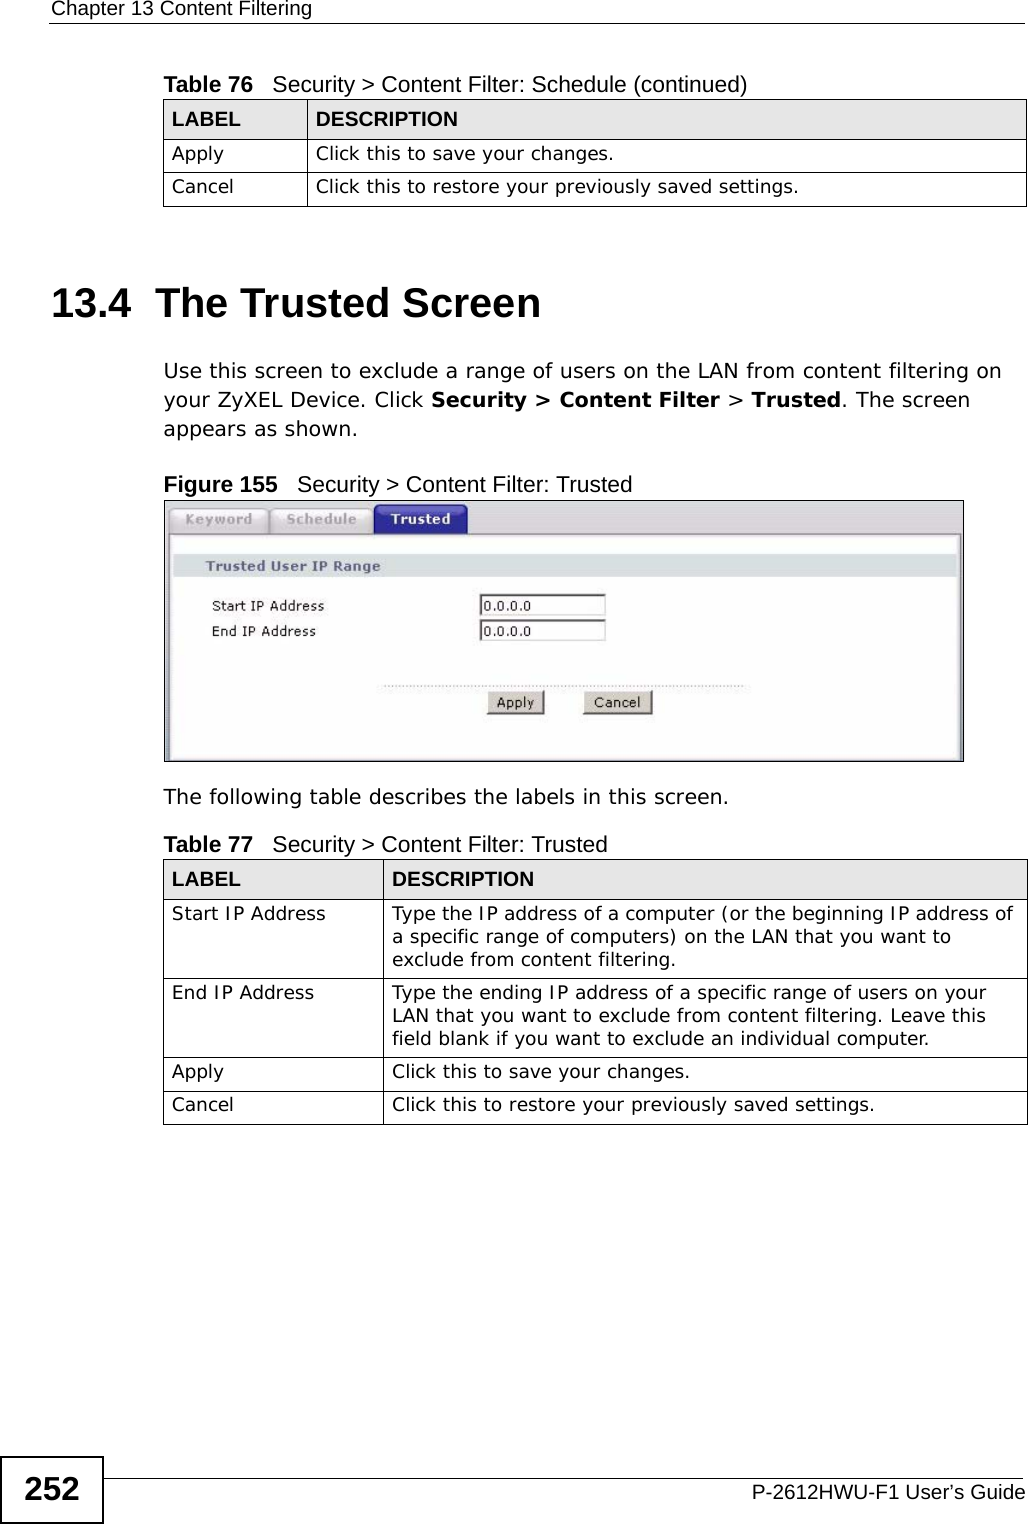 Chapter 13 Content FilteringP-2612HWU-F1 User’s Guide25213.4  The Trusted Screen Use this screen to exclude a range of users on the LAN from content filtering on your ZyXEL Device. Click Security &gt; Content Filter &gt; Trusted. The screen appears as shown.Figure 155   Security &gt; Content Filter: TrustedThe following table describes the labels in this screen. Apply  Click this to save your changes.Cancel Click this to restore your previously saved settings.Table 76   Security &gt; Content Filter: Schedule (continued)LABEL DESCRIPTIONTable 77   Security &gt; Content Filter: TrustedLABEL DESCRIPTIONStart IP Address Type the IP address of a computer (or the beginning IP address of a specific range of computers) on the LAN that you want to exclude from content filtering. End IP Address Type the ending IP address of a specific range of users on your LAN that you want to exclude from content filtering. Leave this field blank if you want to exclude an individual computer.Apply  Click this to save your changes.Cancel Click this to restore your previously saved settings.